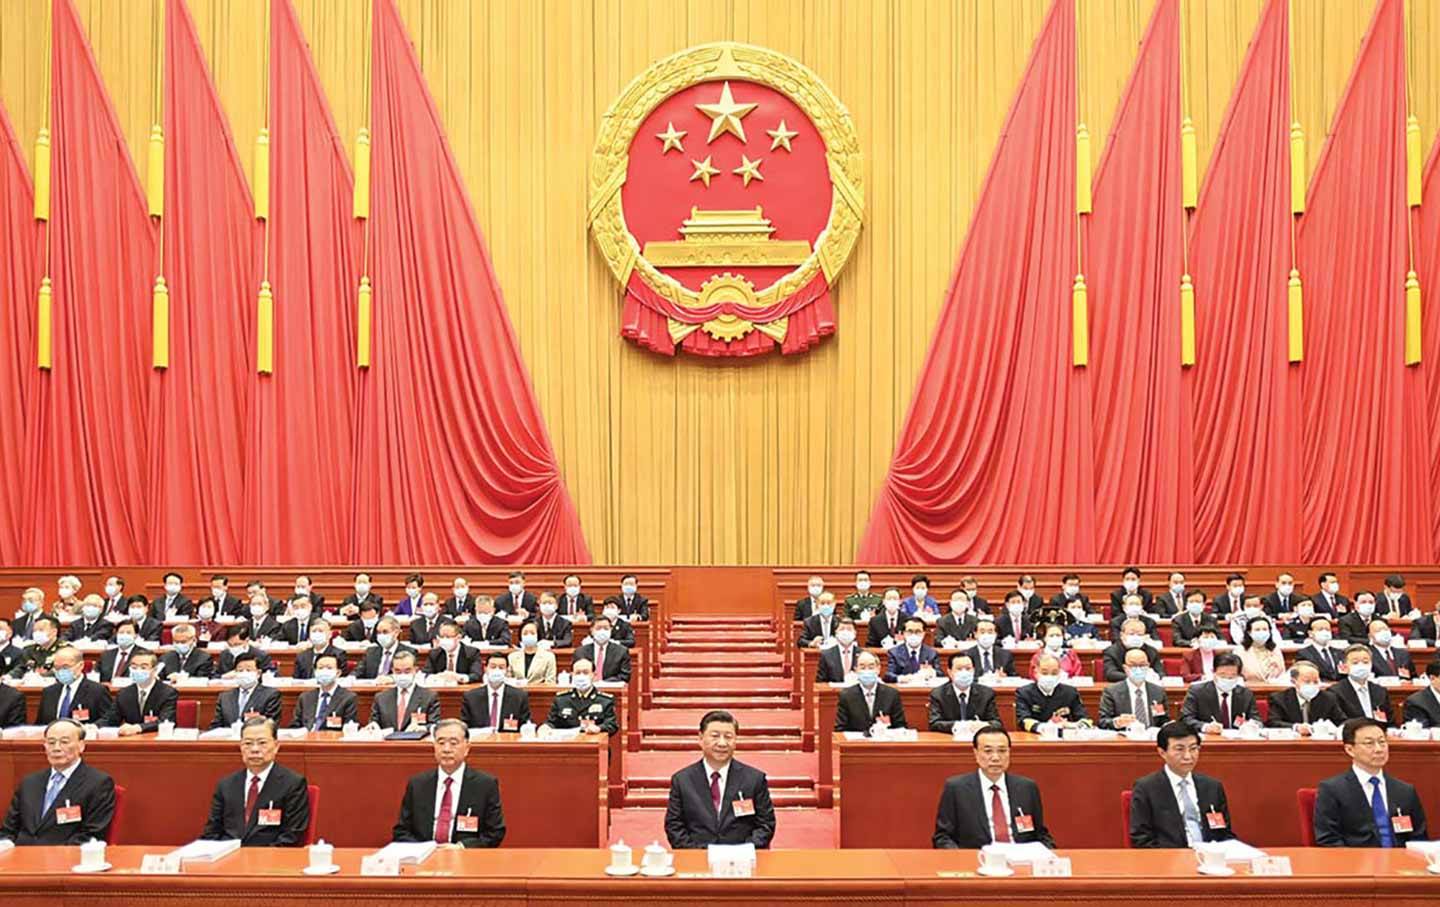 President Xi Jinping (center) and leaders of the Chinese Communist Party attend the opening of the National People’s Congress in 2021